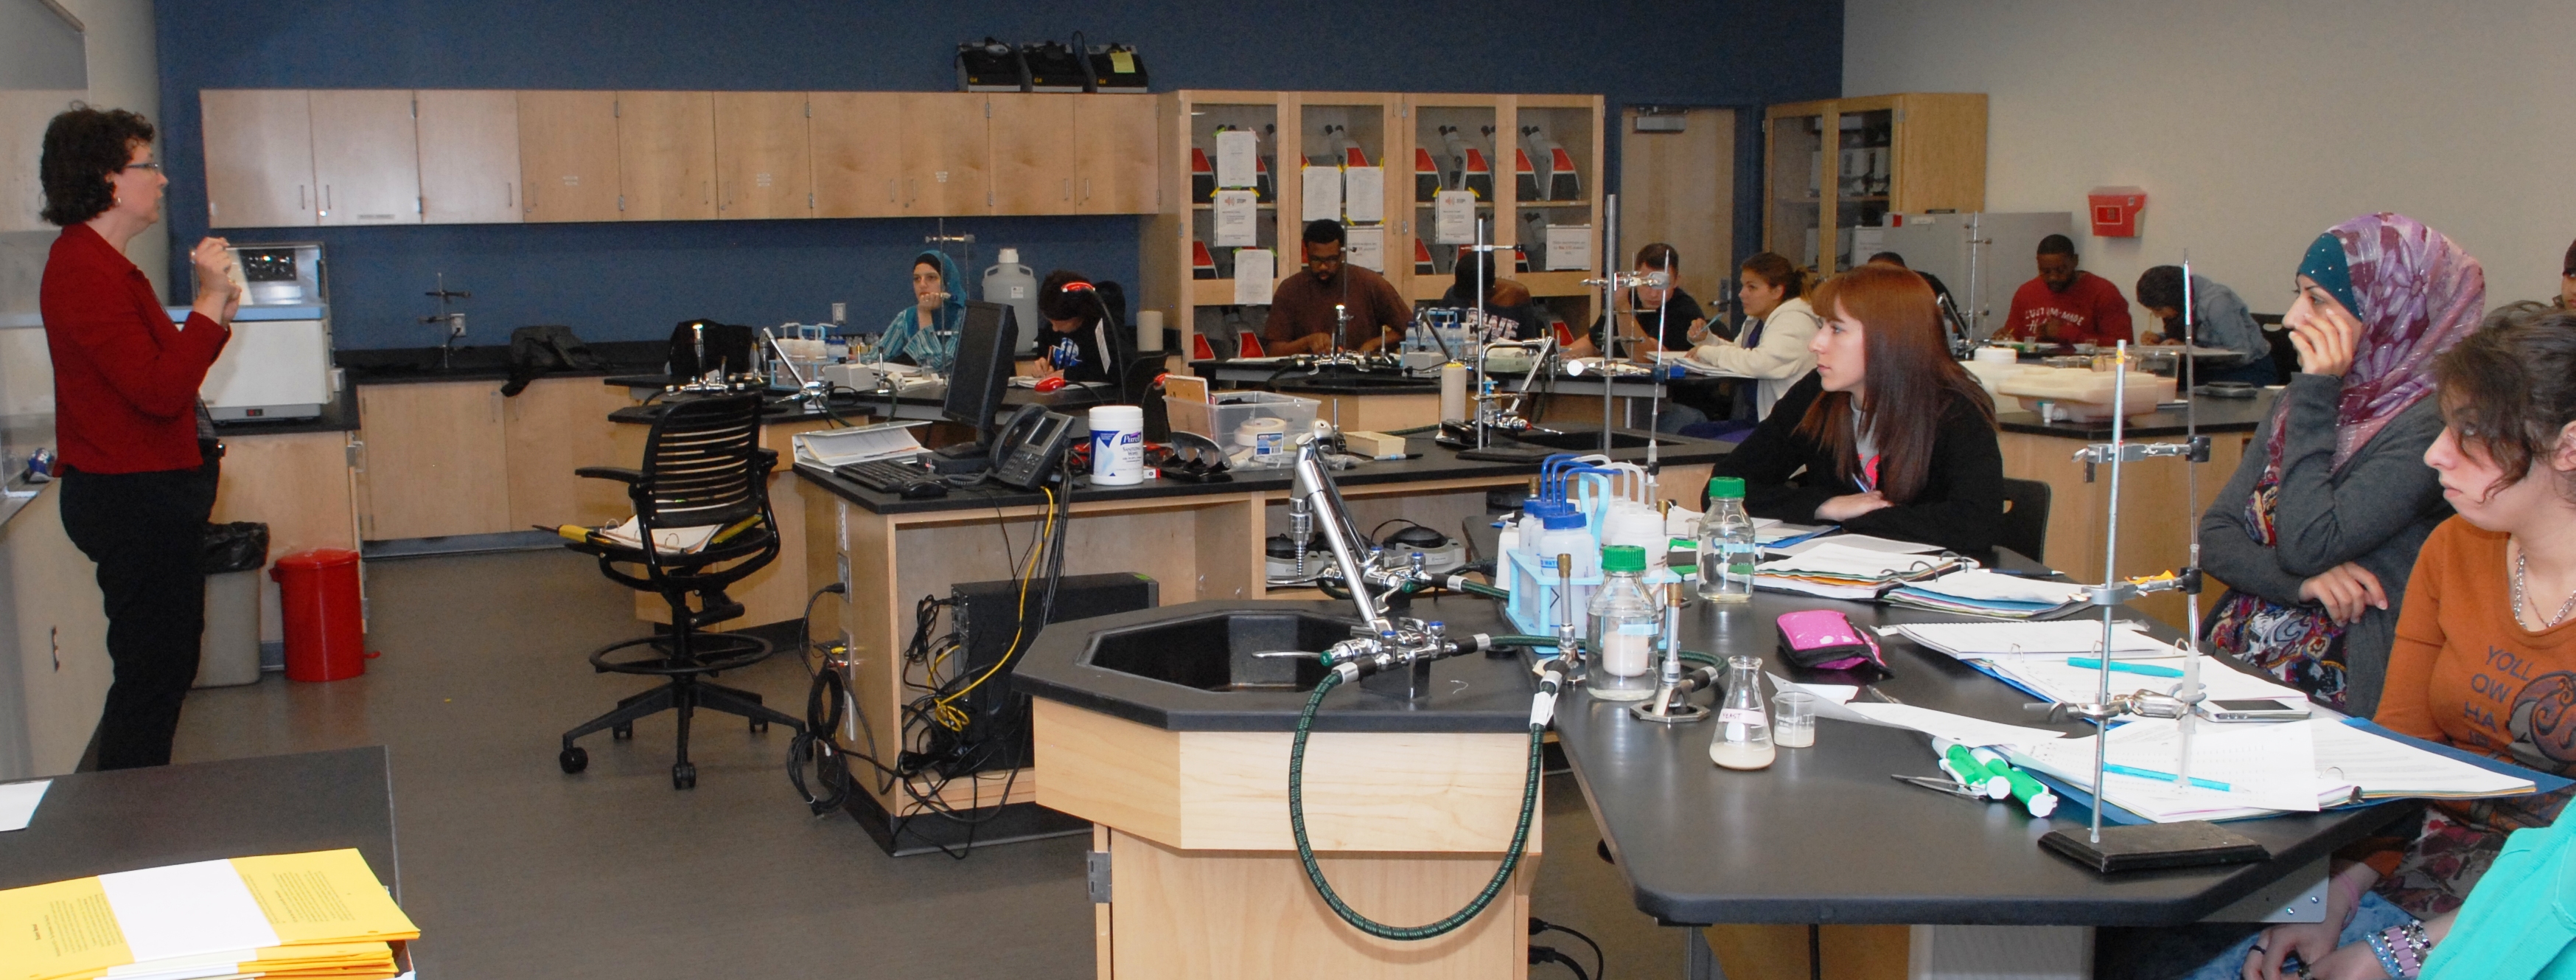 Molecular Biology lab in the new science wing